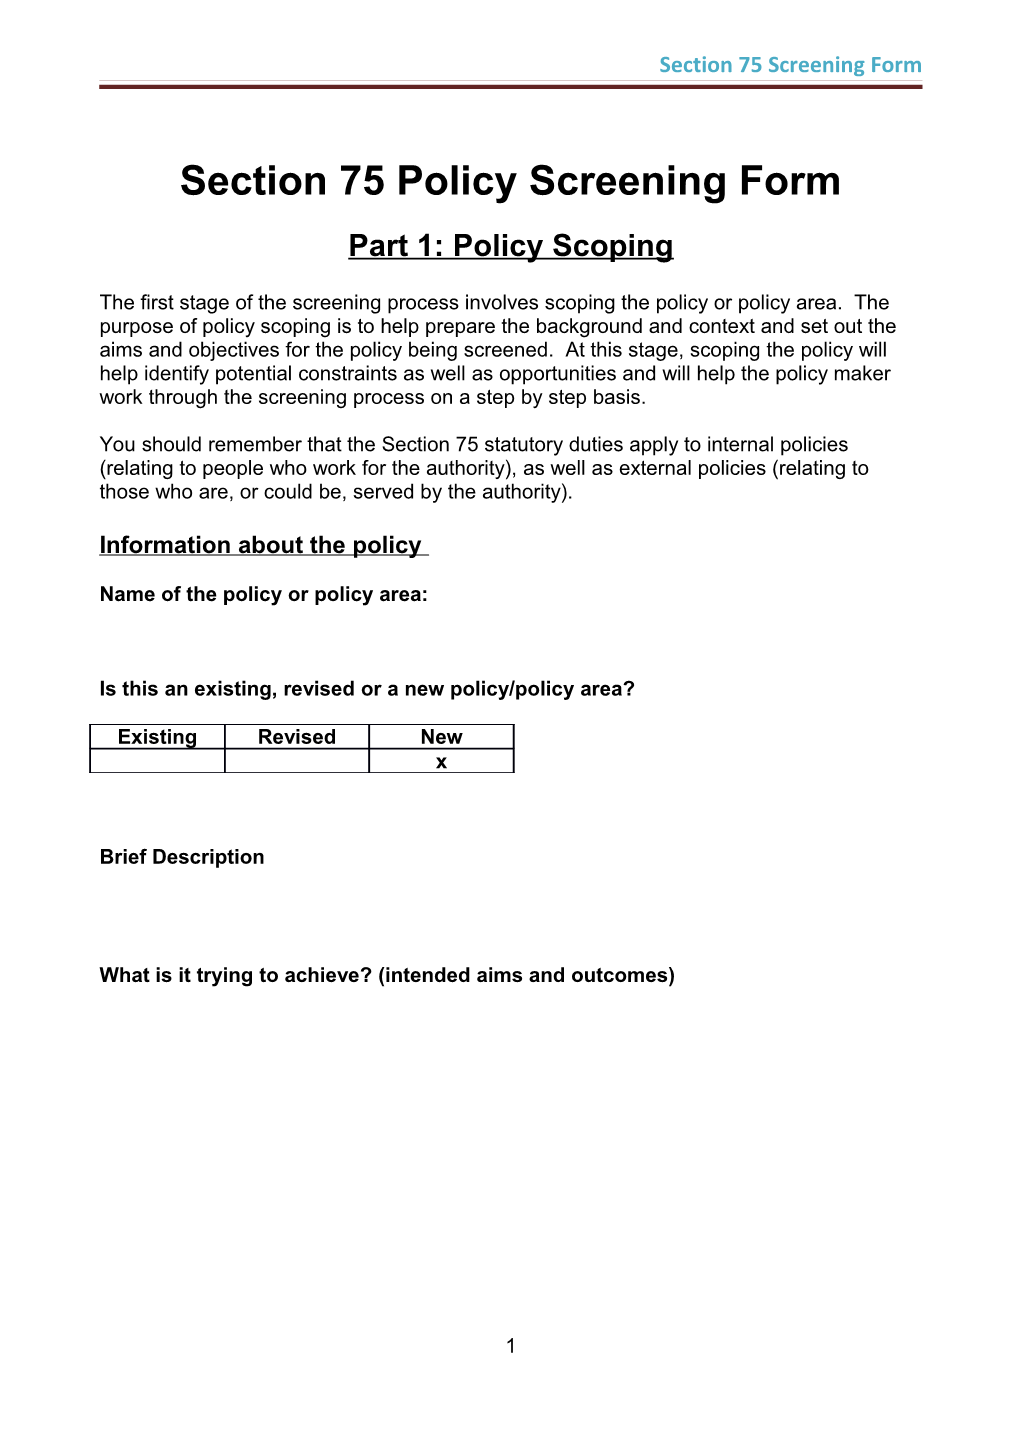 Section 75 Screening Form